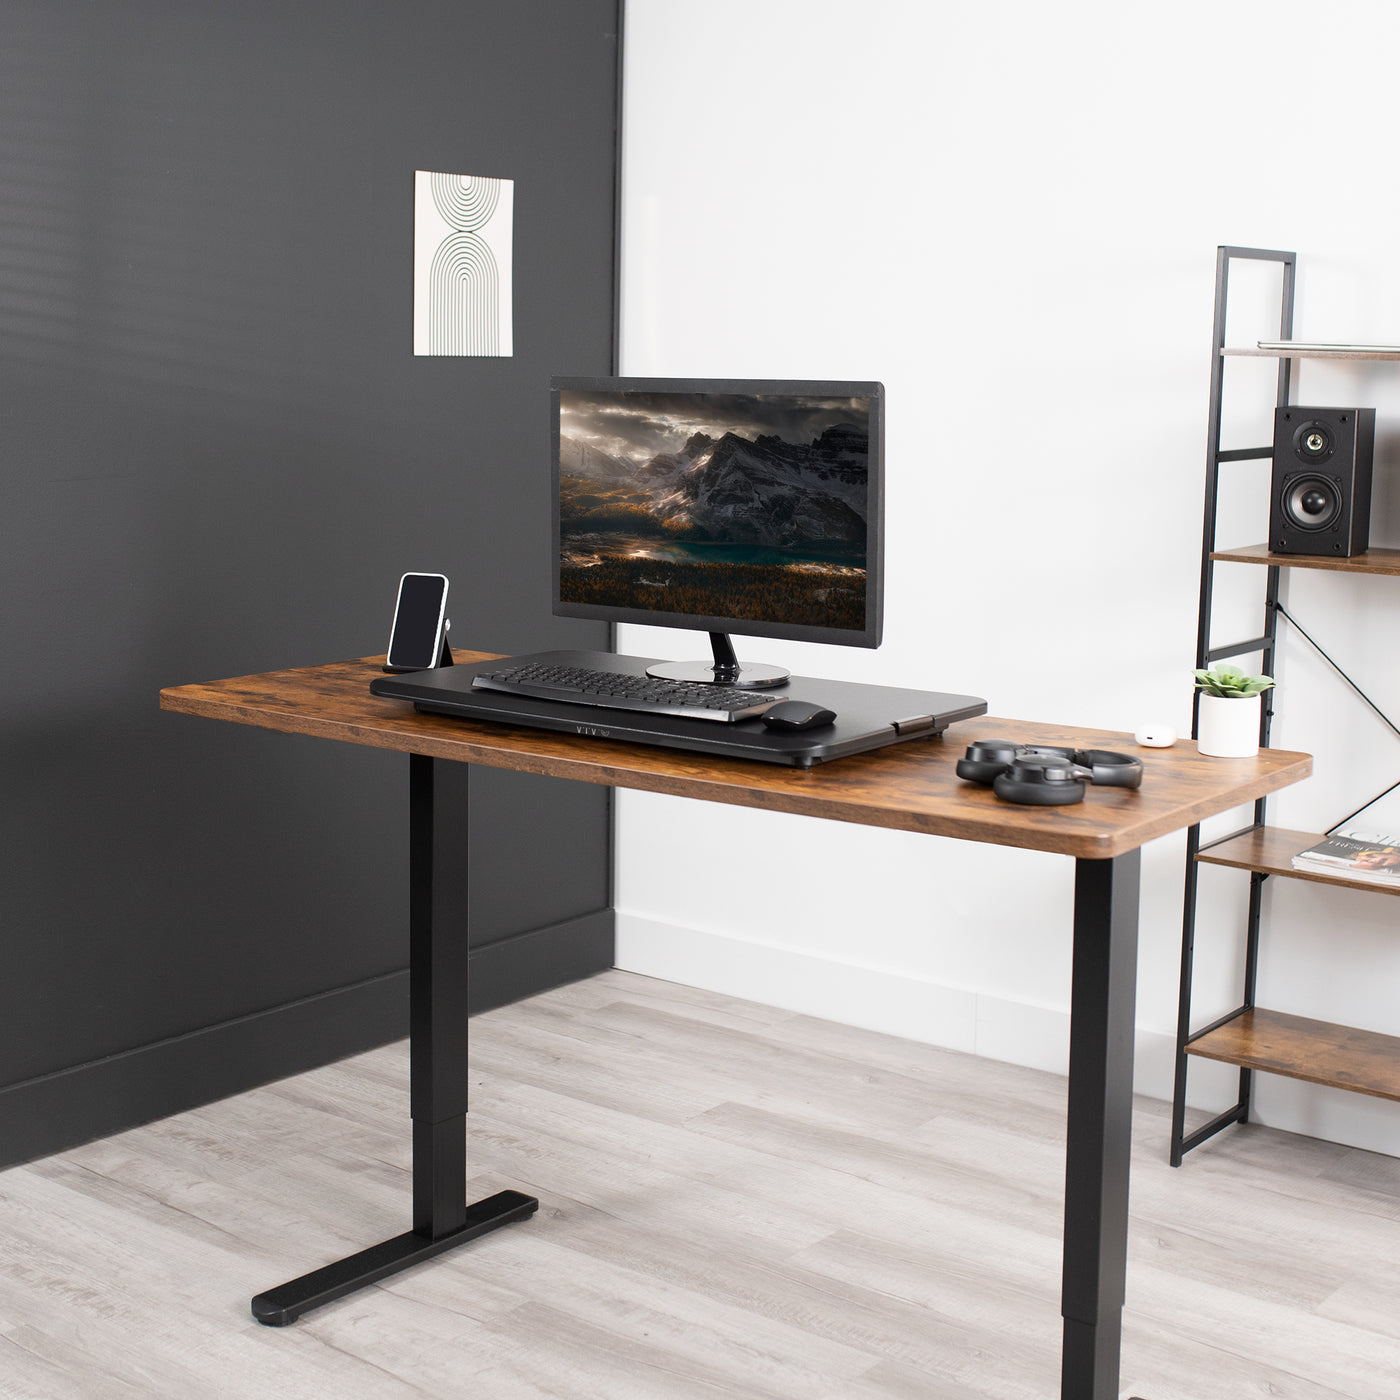 Sit at a desk with a tabletop desk converter.